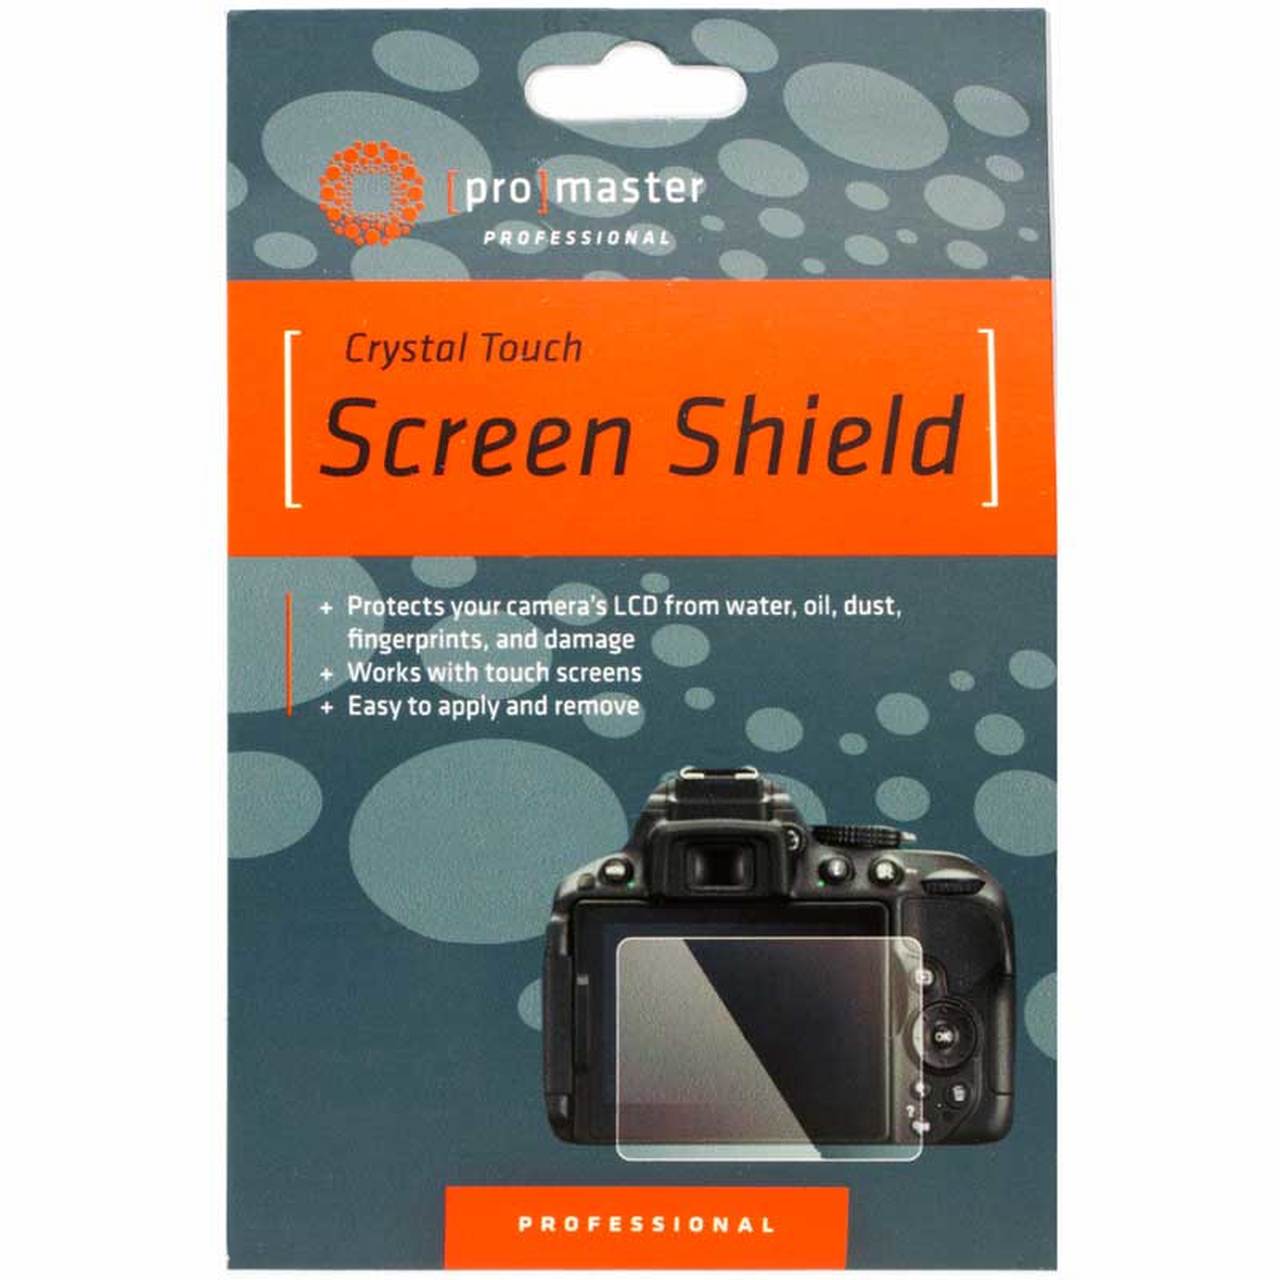 Promaster 1704 Crystal Touch Screen  Shield - Panasonic DCG9, GX85, GX80, GX7MKII, G85, LX15, LX10, DC-S5, DC-S5II, FZ300, FZ2000, FZ2500, FZH1, G7, G8, GH6, G80, LX9